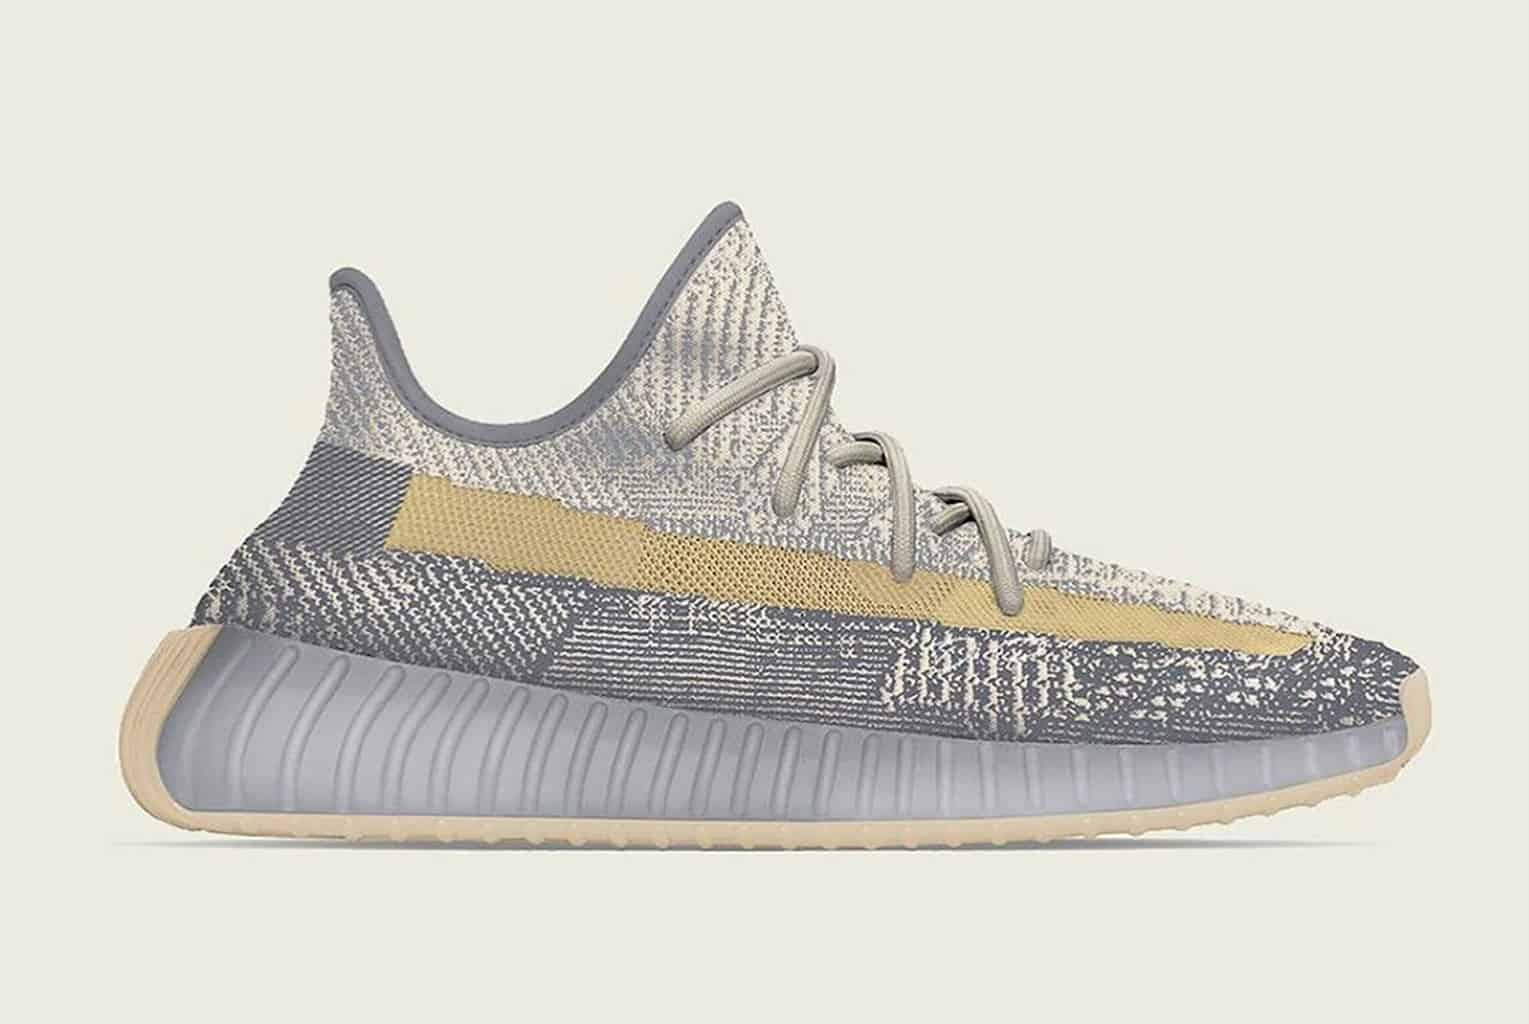 The Adidas Yeezy Boost 350 V2 \